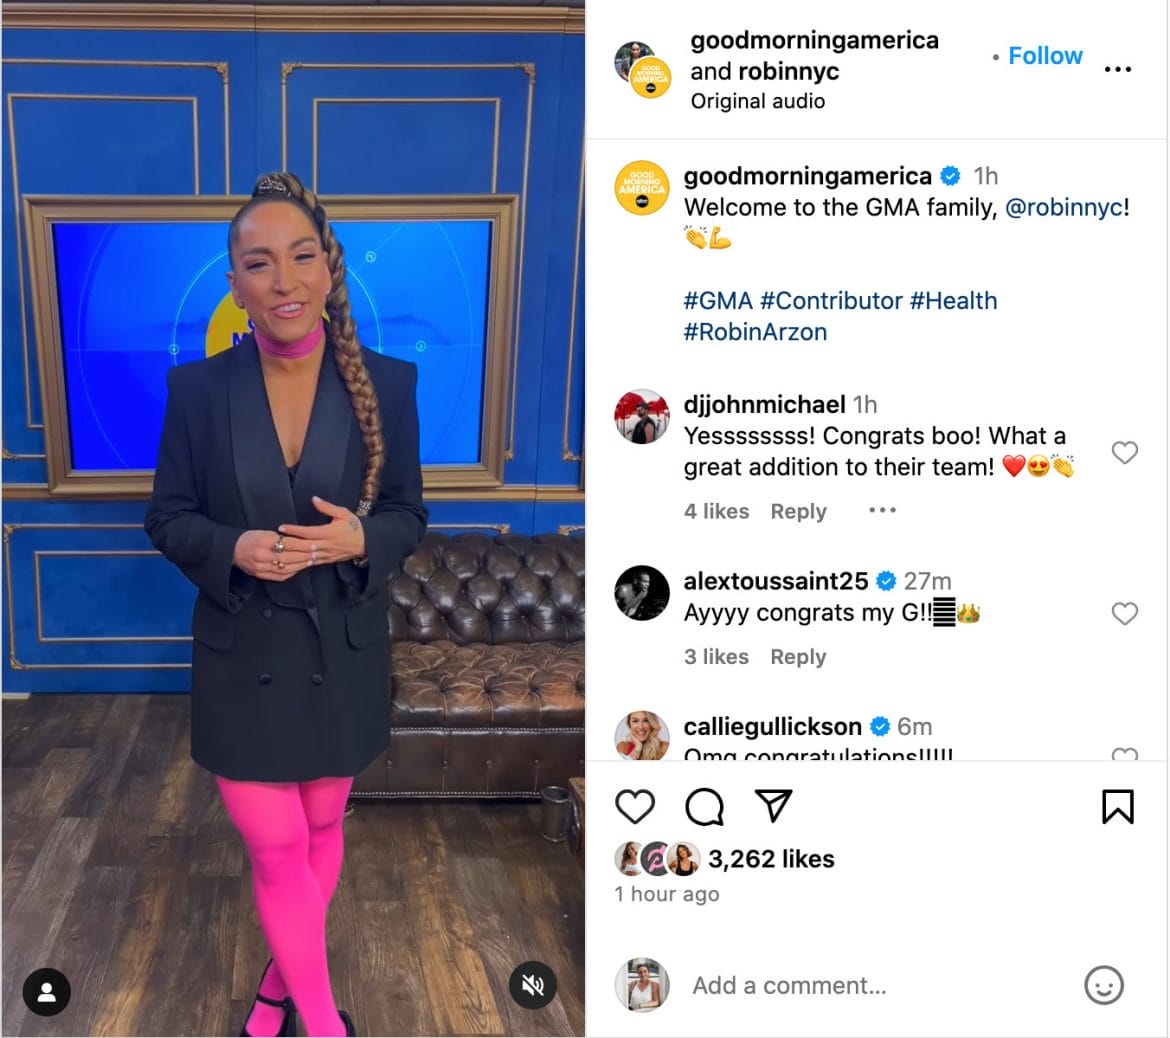 Robin Arzón & Good Morning America Instagram post about Robin joining GMA team.